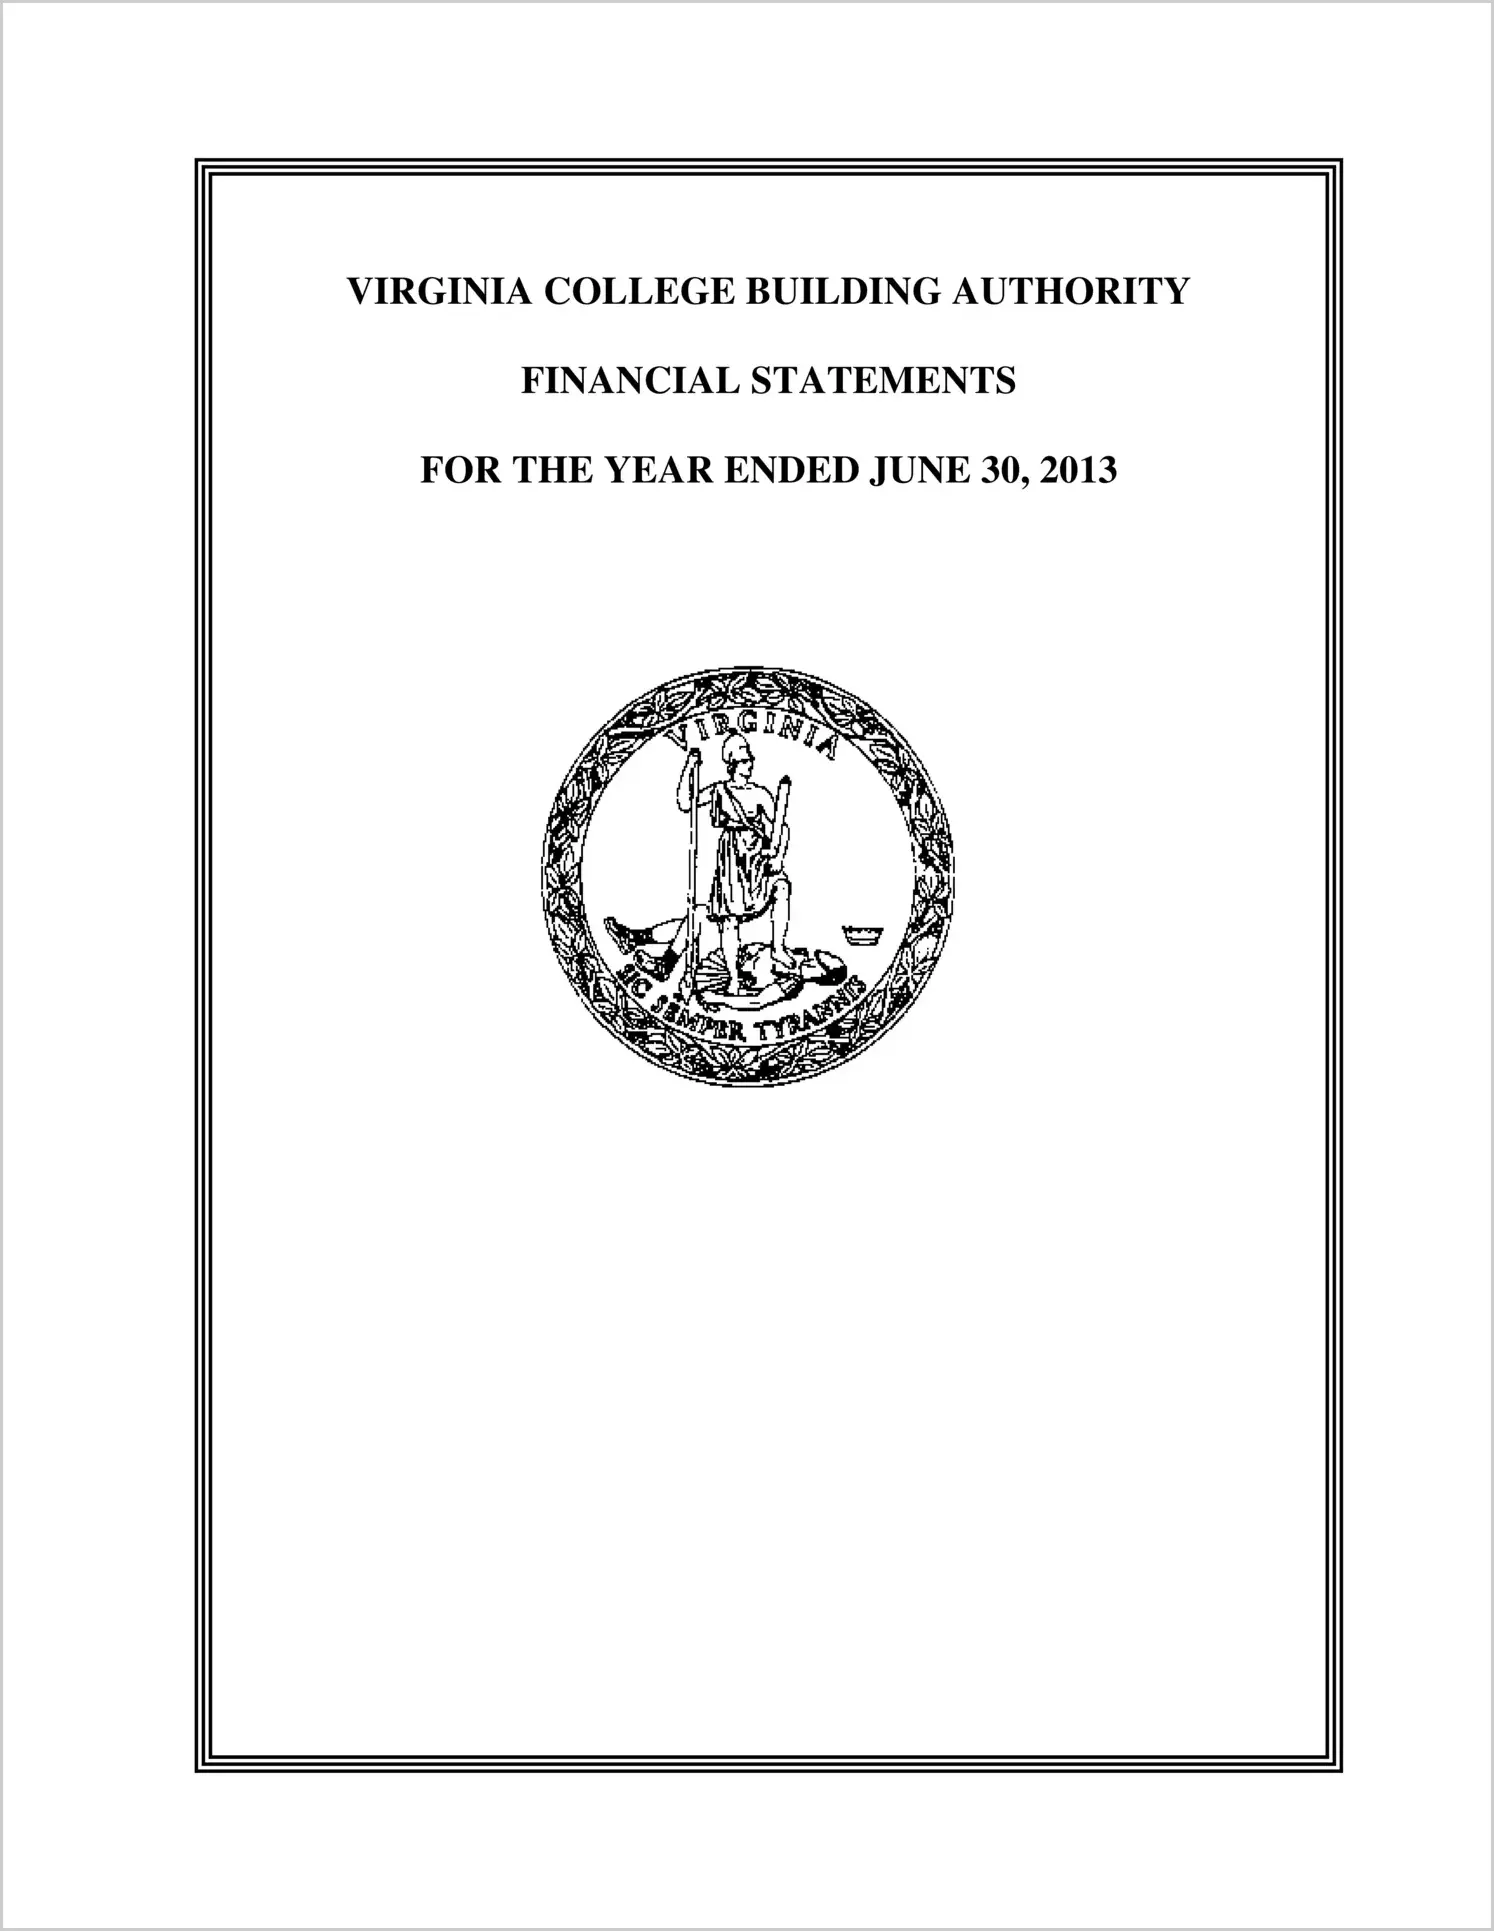 Virginia College Building Authority Financial Statements for the year ended June 30, 2013